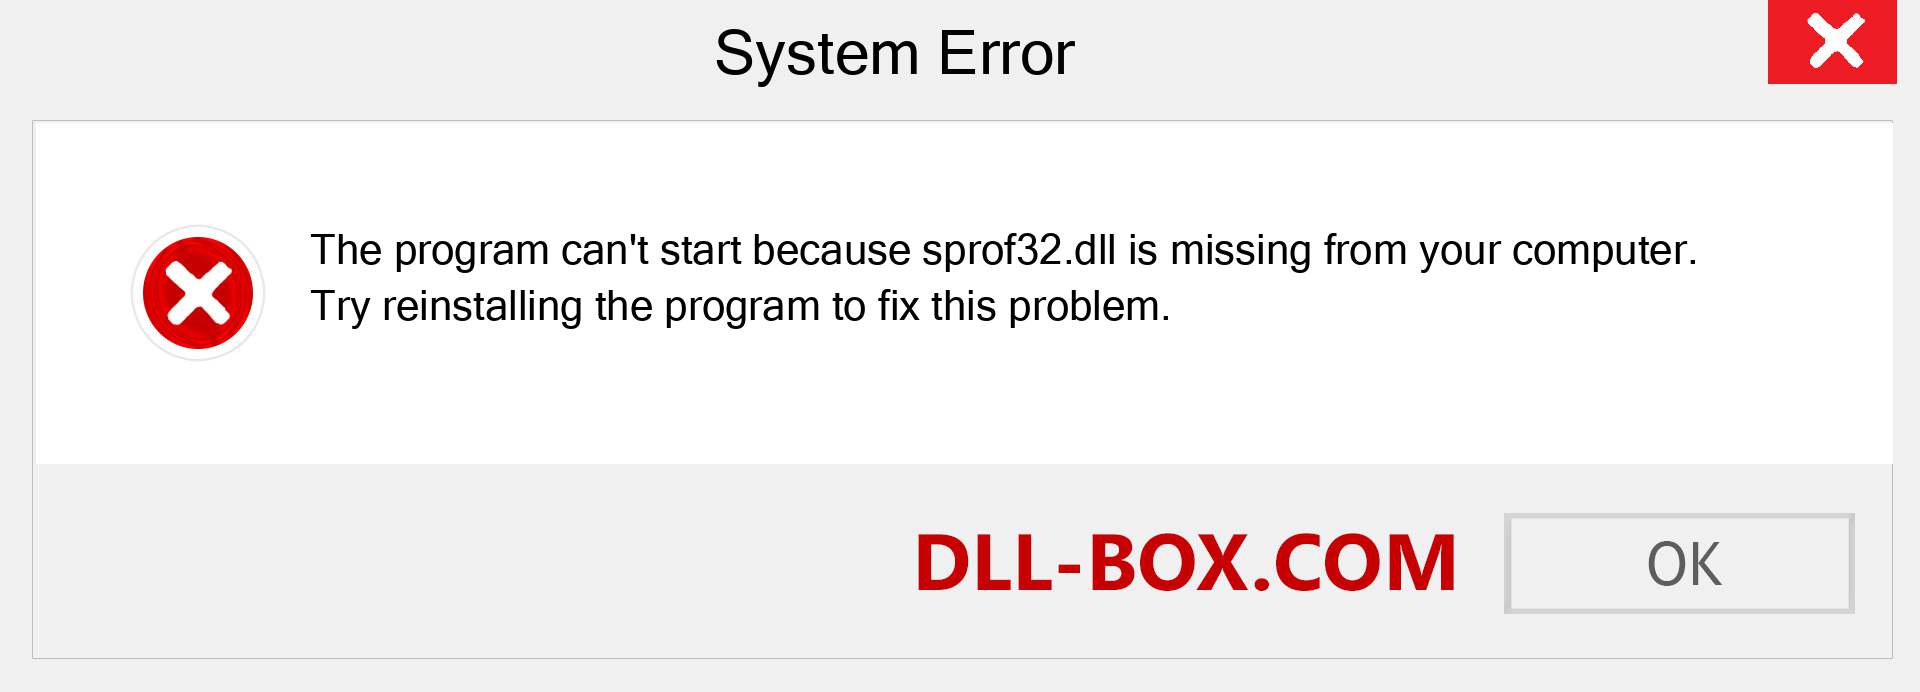  sprof32.dll file is missing?. Download for Windows 7, 8, 10 - Fix  sprof32 dll Missing Error on Windows, photos, images